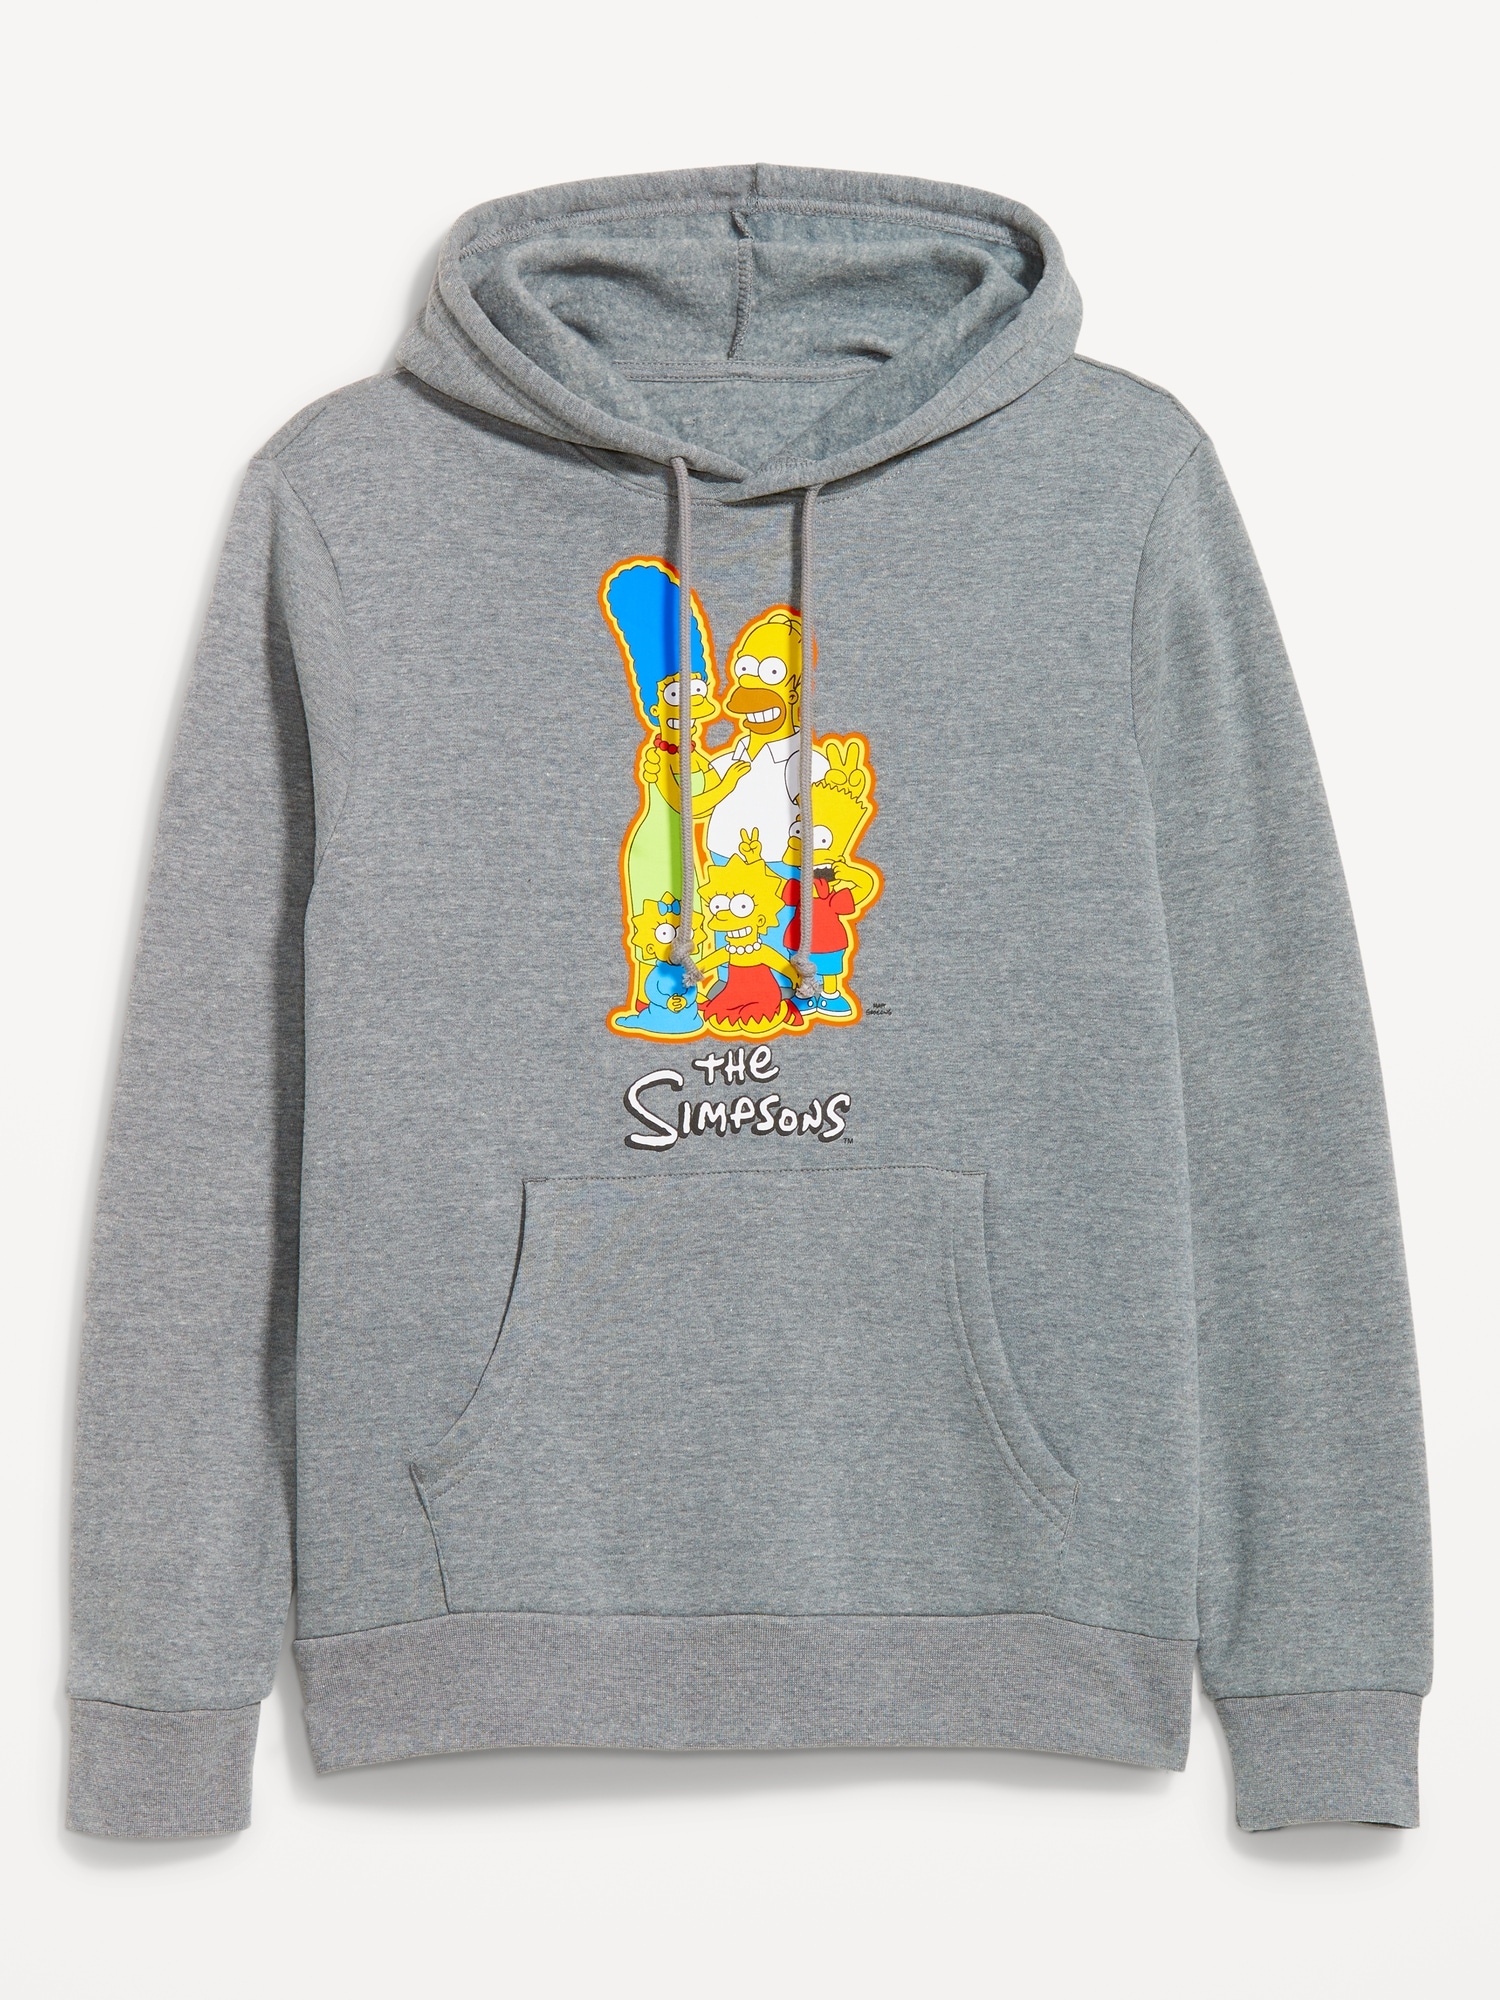 The Simpsons™ Gender-Neutral Hoodie for Adults